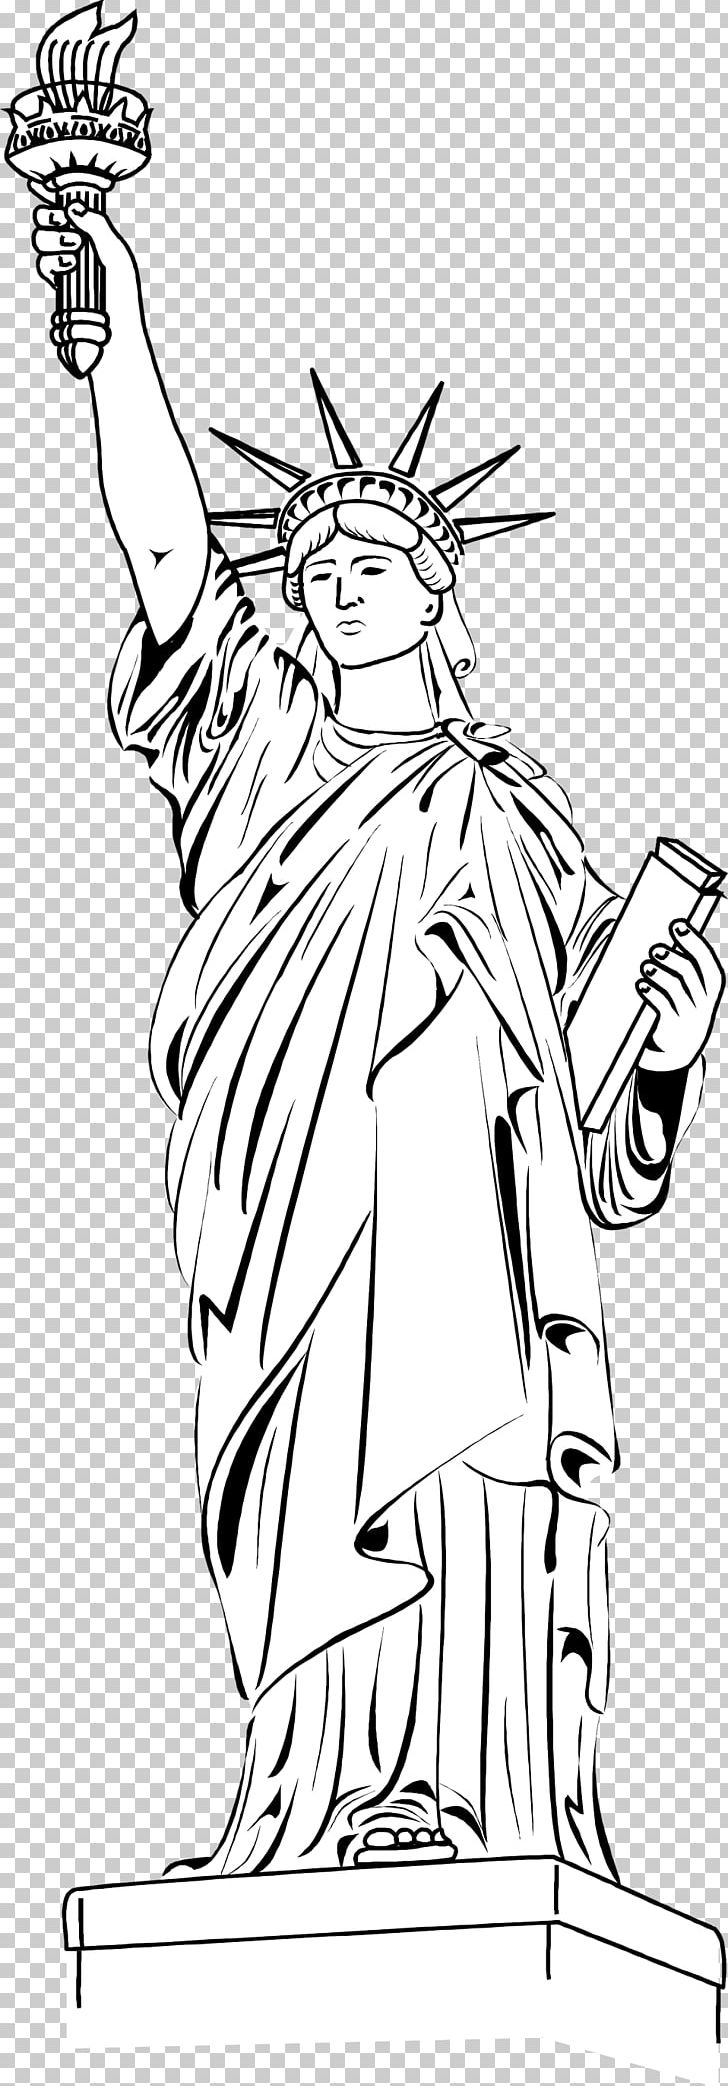 Statue Of Liberty Art Black And White PNG, Clipart, Art, Black, Black And White, Cartoon, Comics Artist Free PNG Download